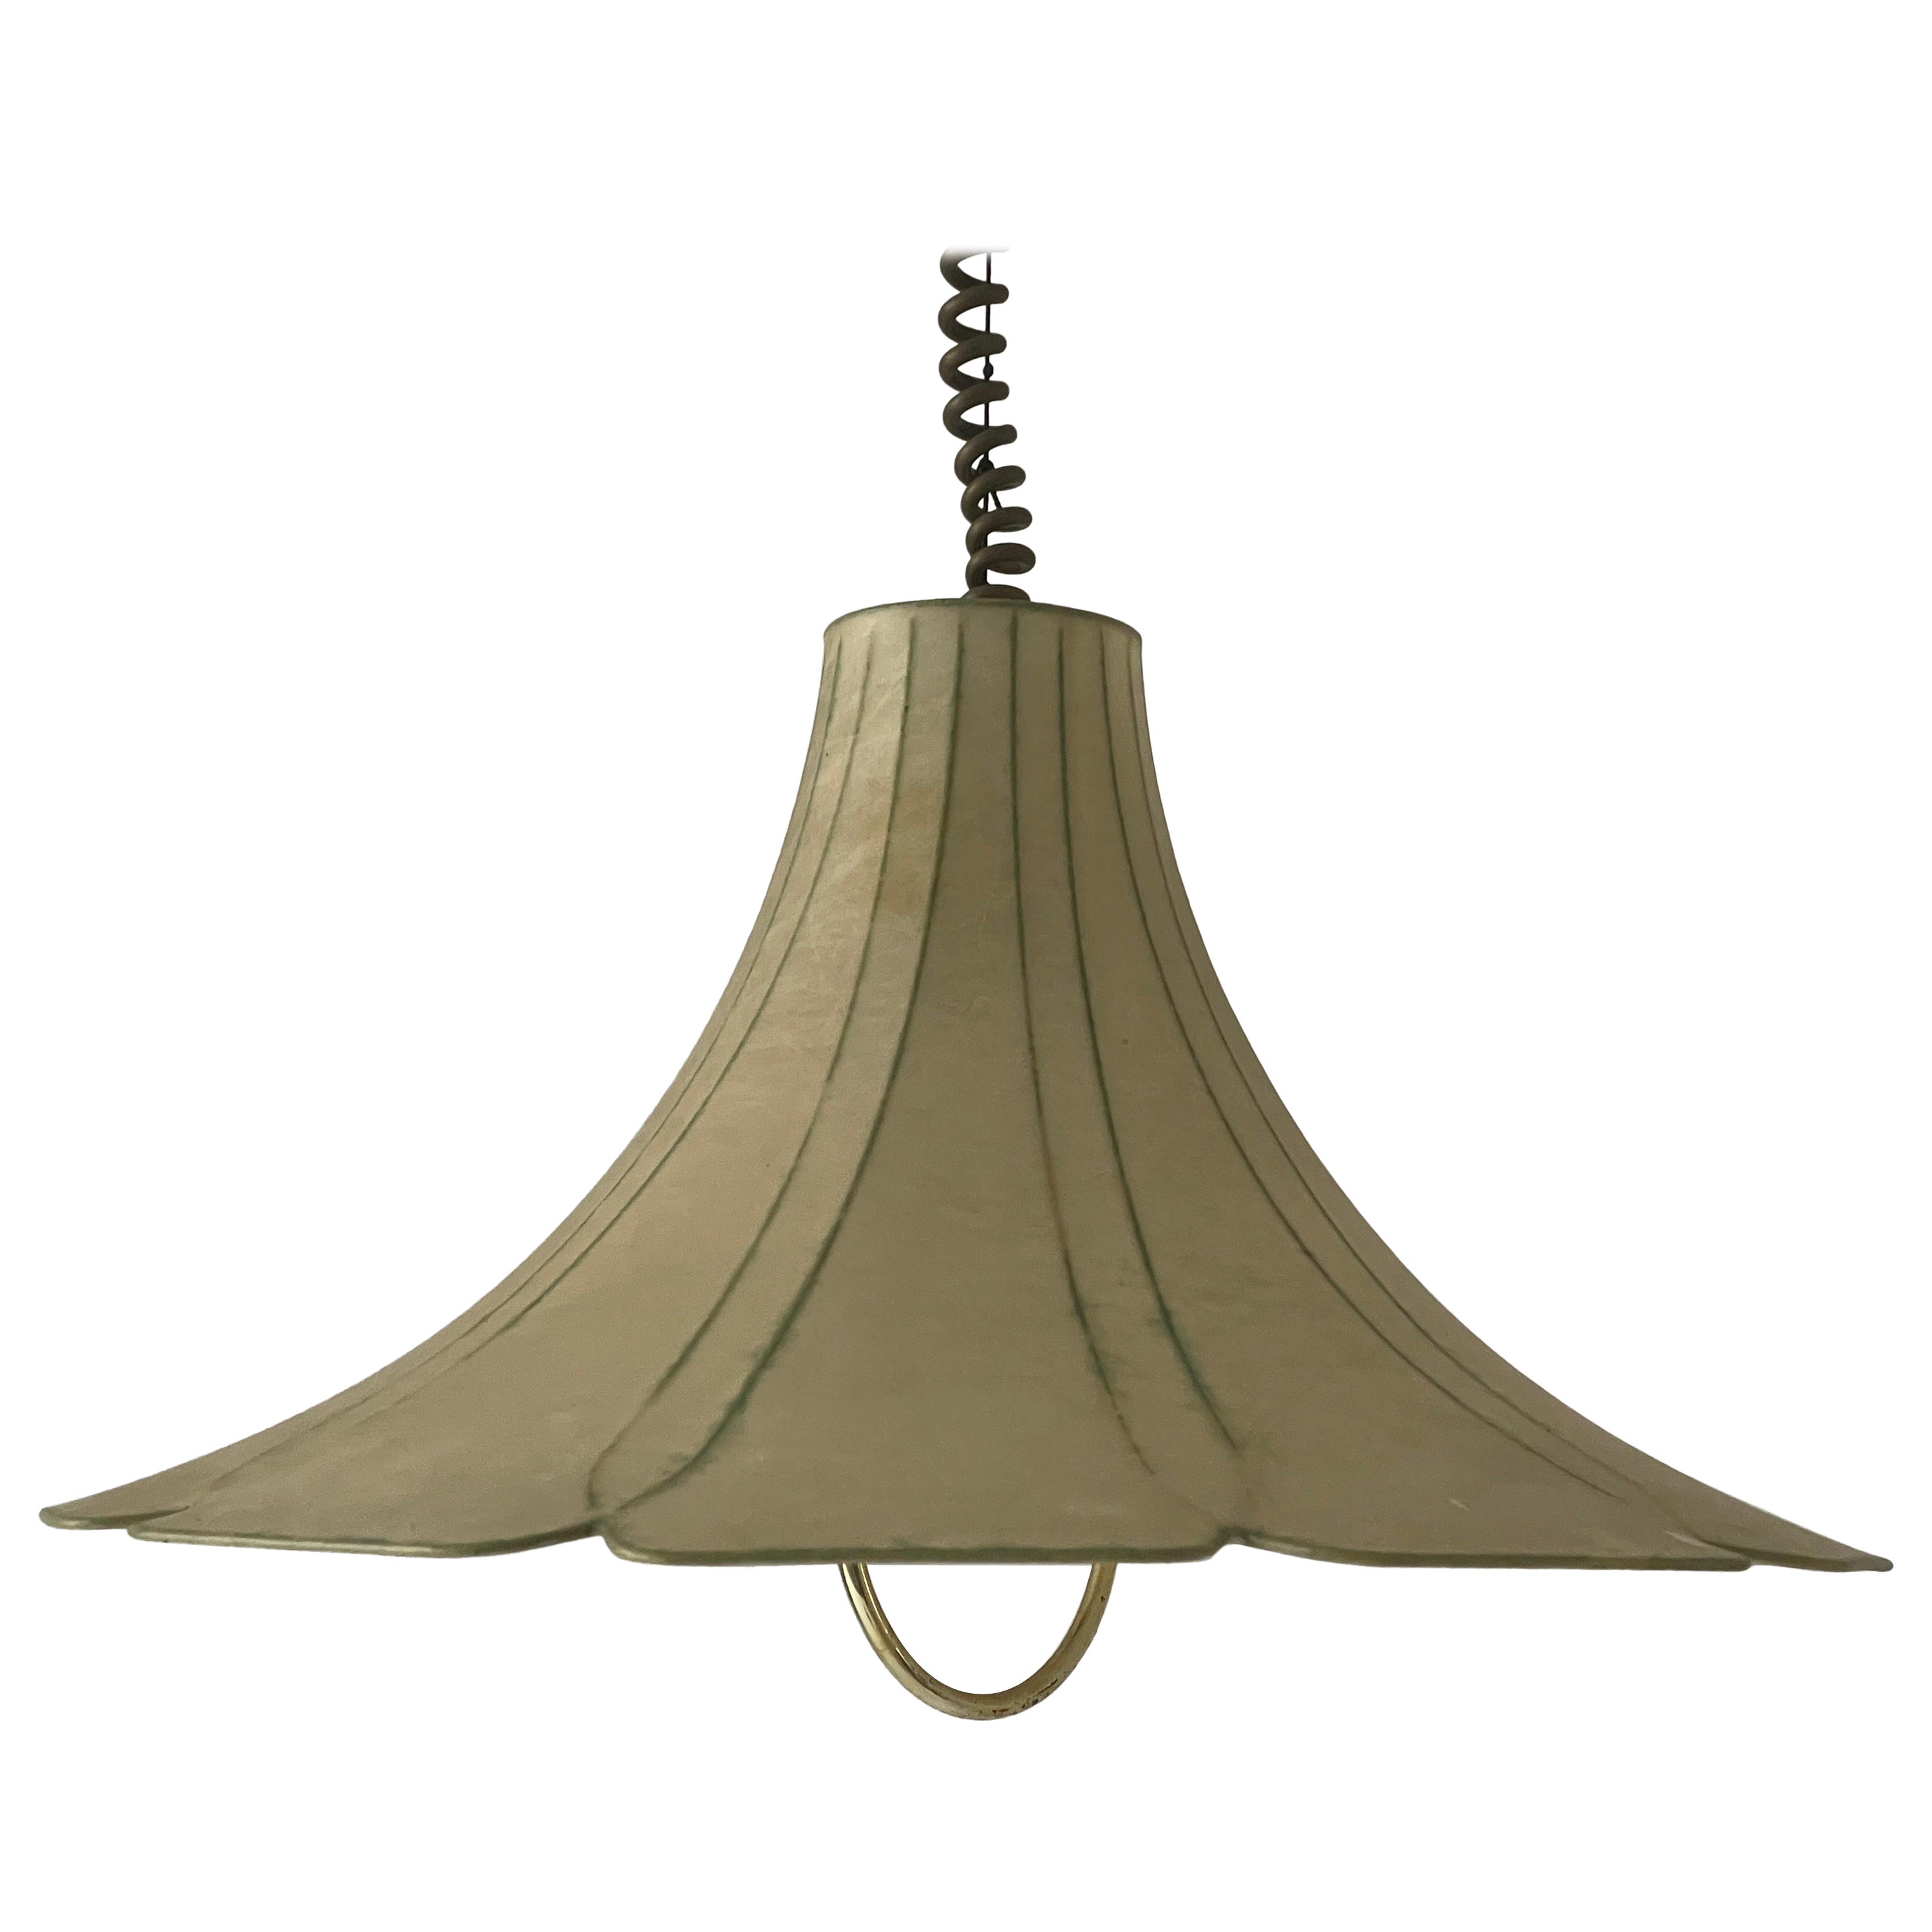 Tulip Design Cocoon Adjustable Height Pendant Lamp by Goldkant, 1960s, Germany For Sale